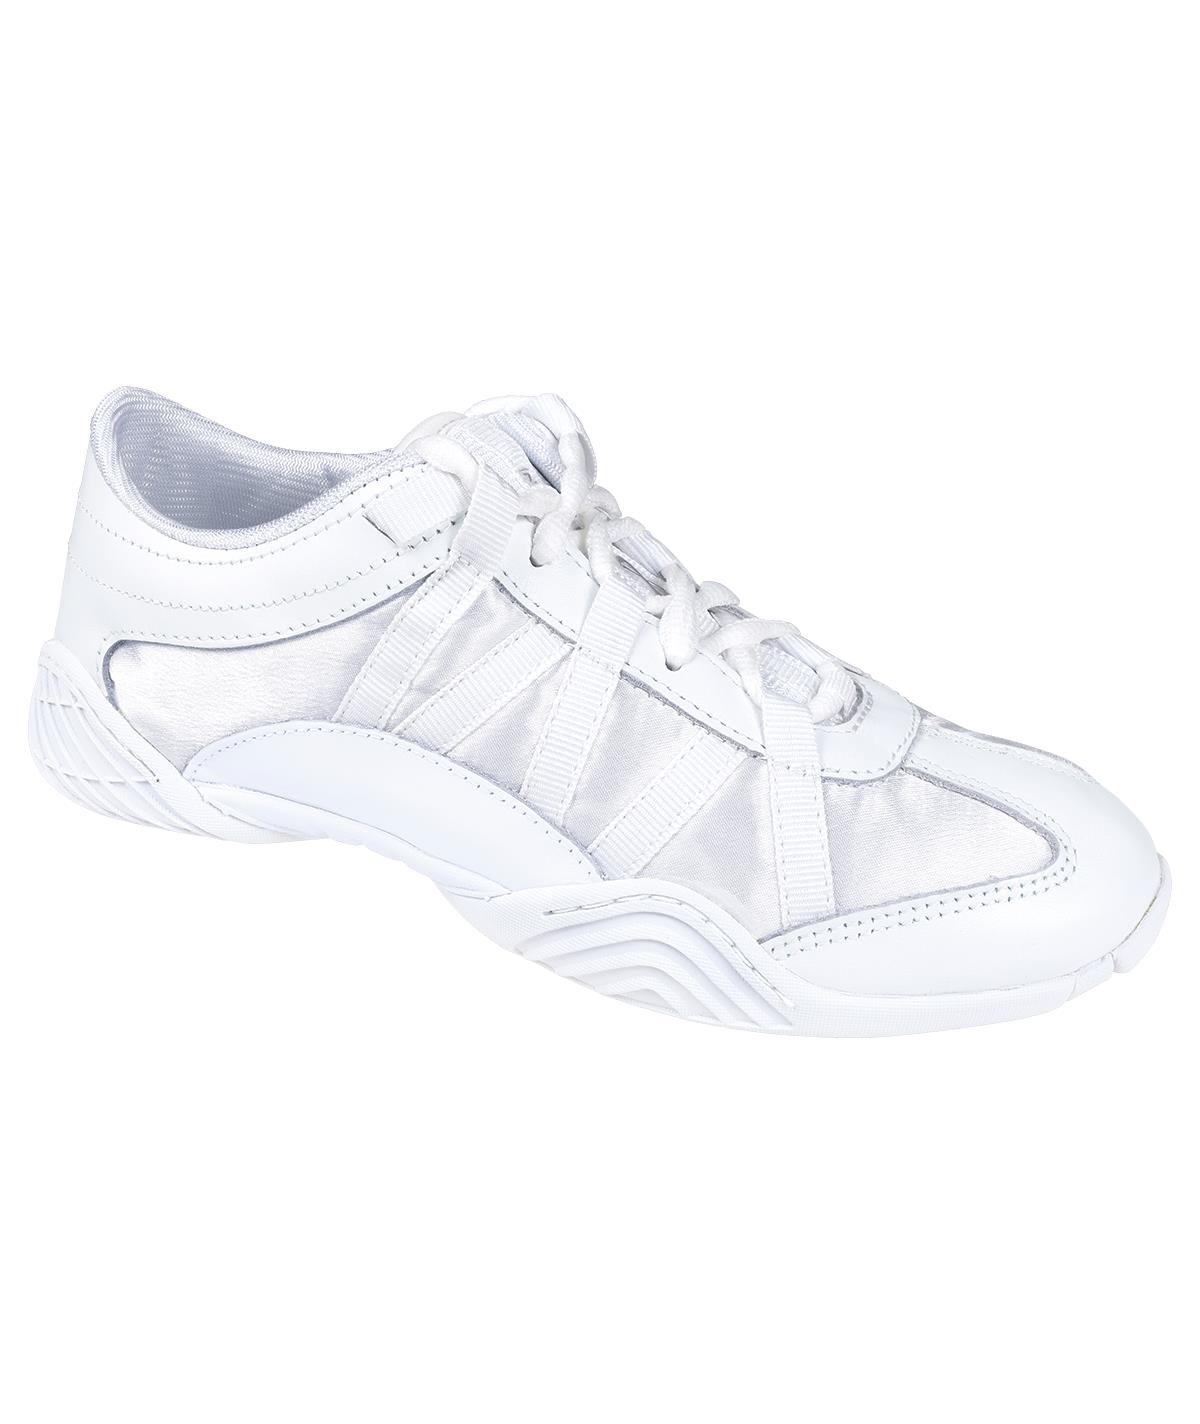 Nfinity White Evolution Cheerleading Shoes Multiple Adult Sizes New w/ Case 